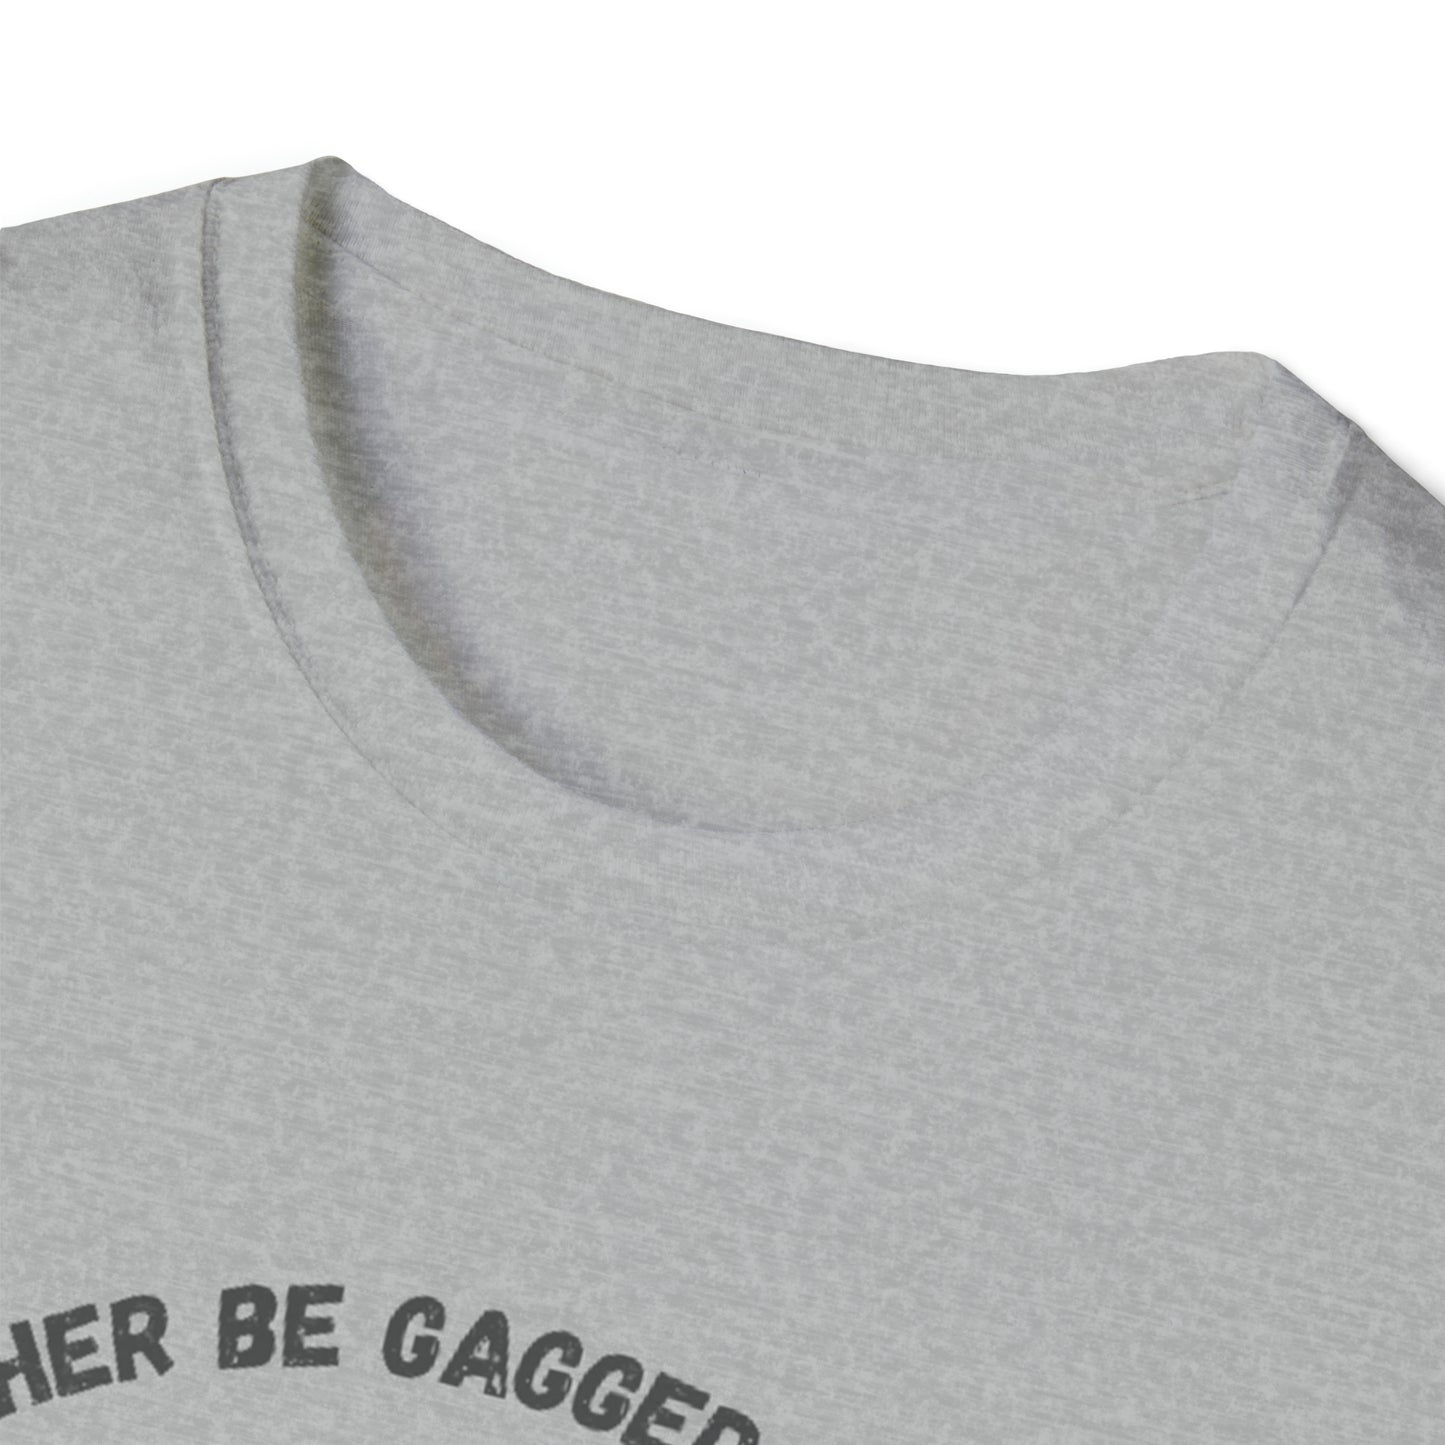 I'd Rather Be Gagged Unisex Softstyle T-Shirt